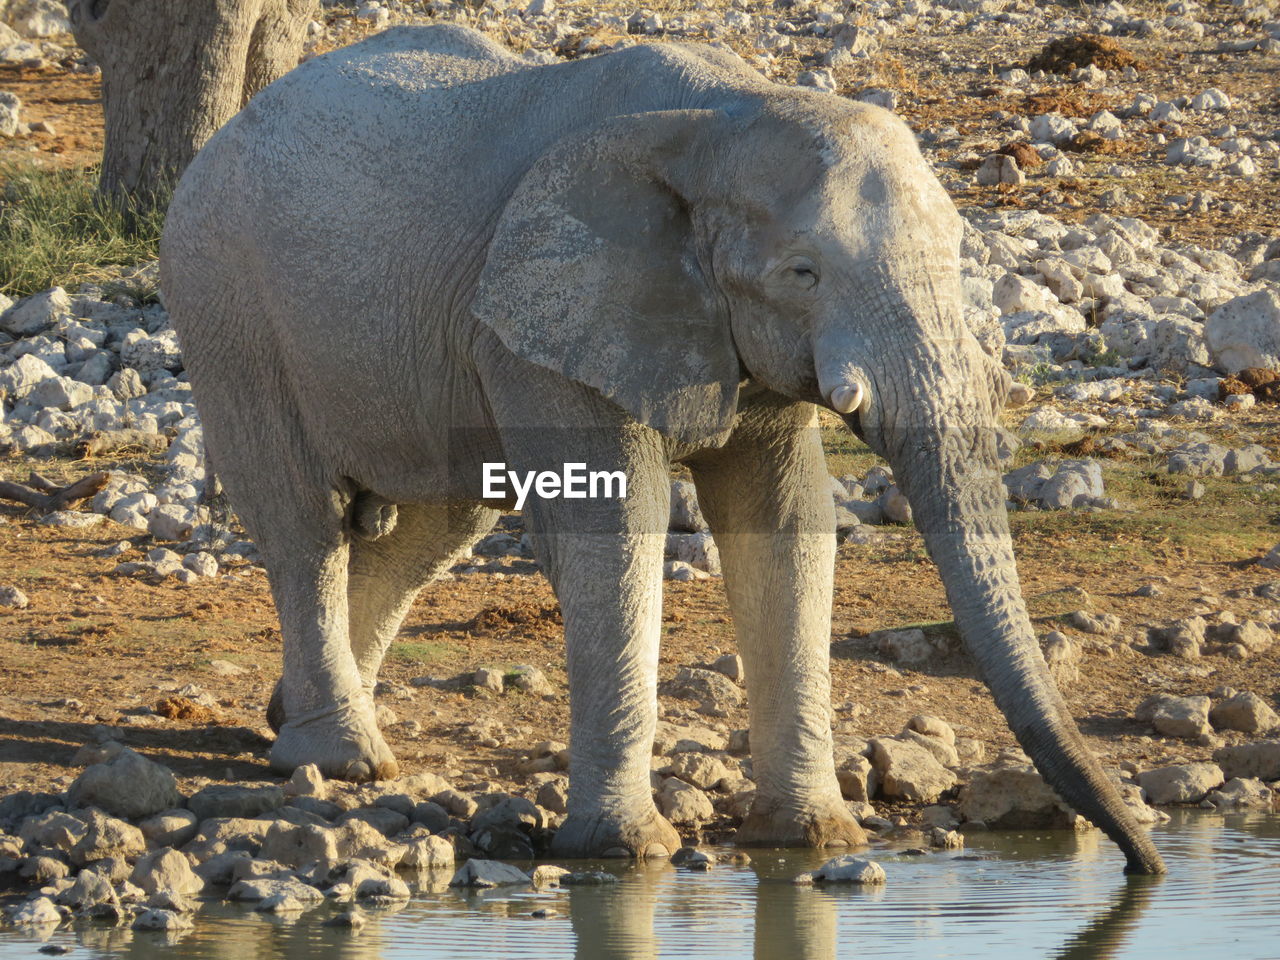 VIEW OF ELEPHANT IN THE WATER